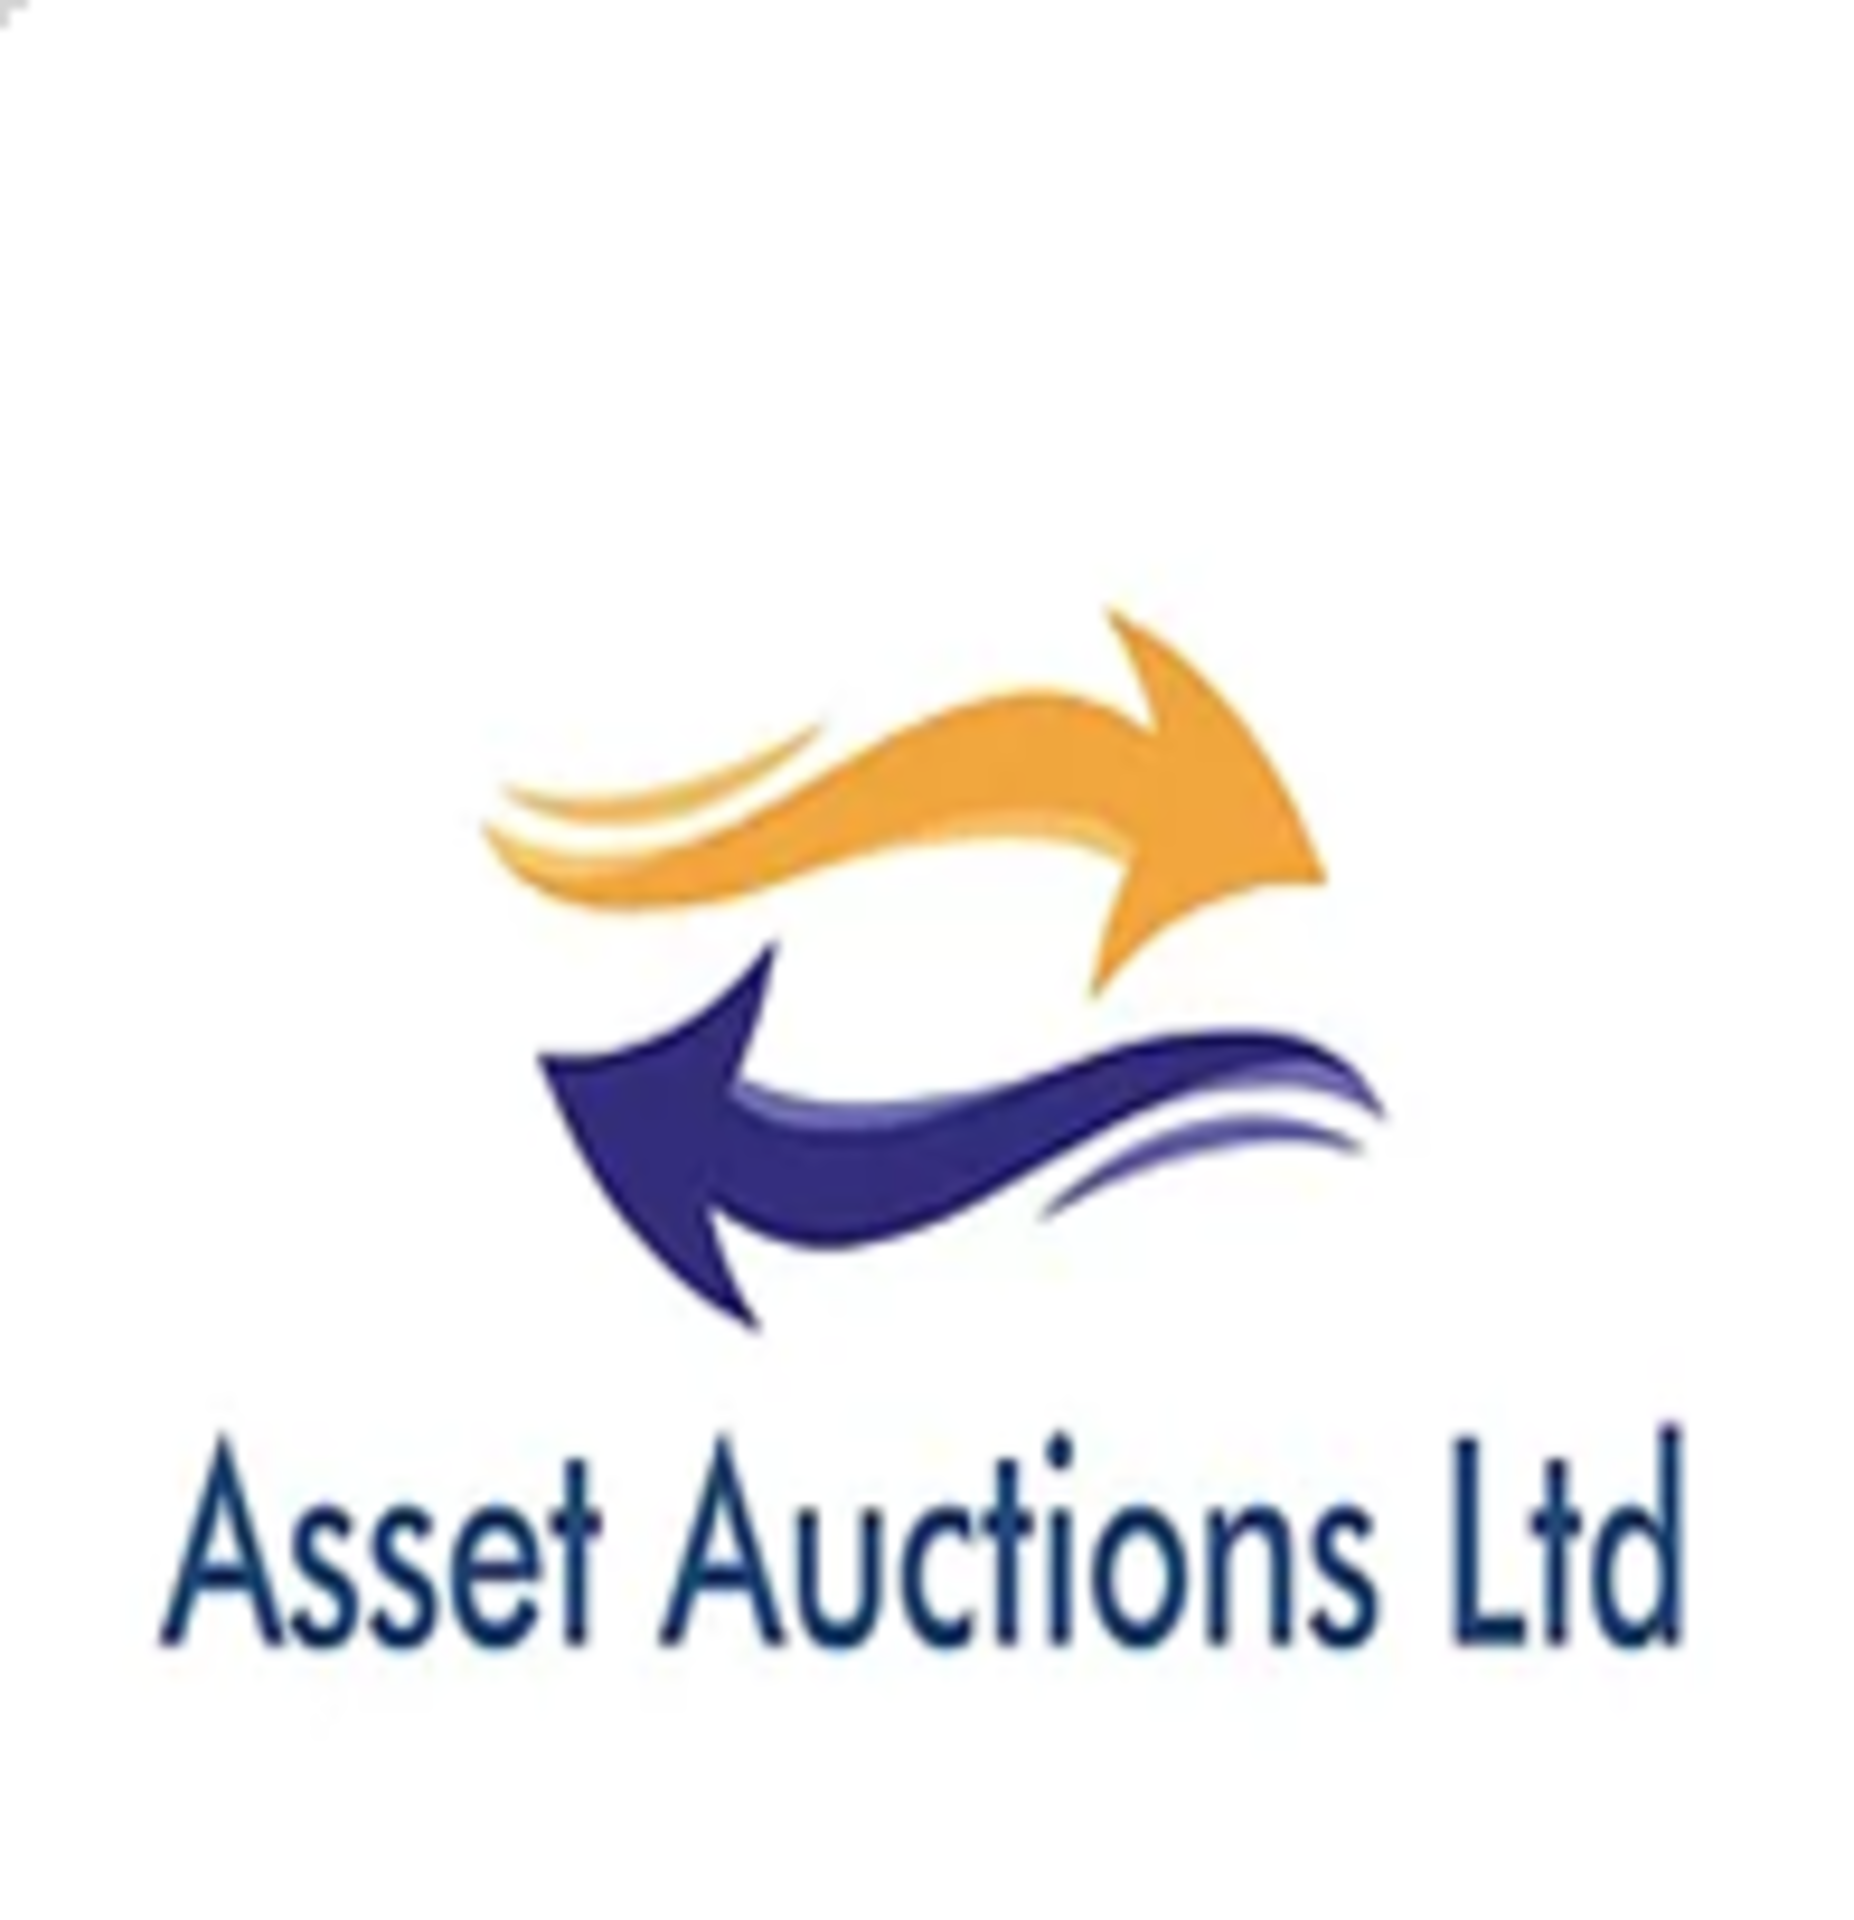 YOUR ASSETS COULD BE LISTED HERE! DID YOU KNOW THAT IT'S FREE TO SELL WITH US?